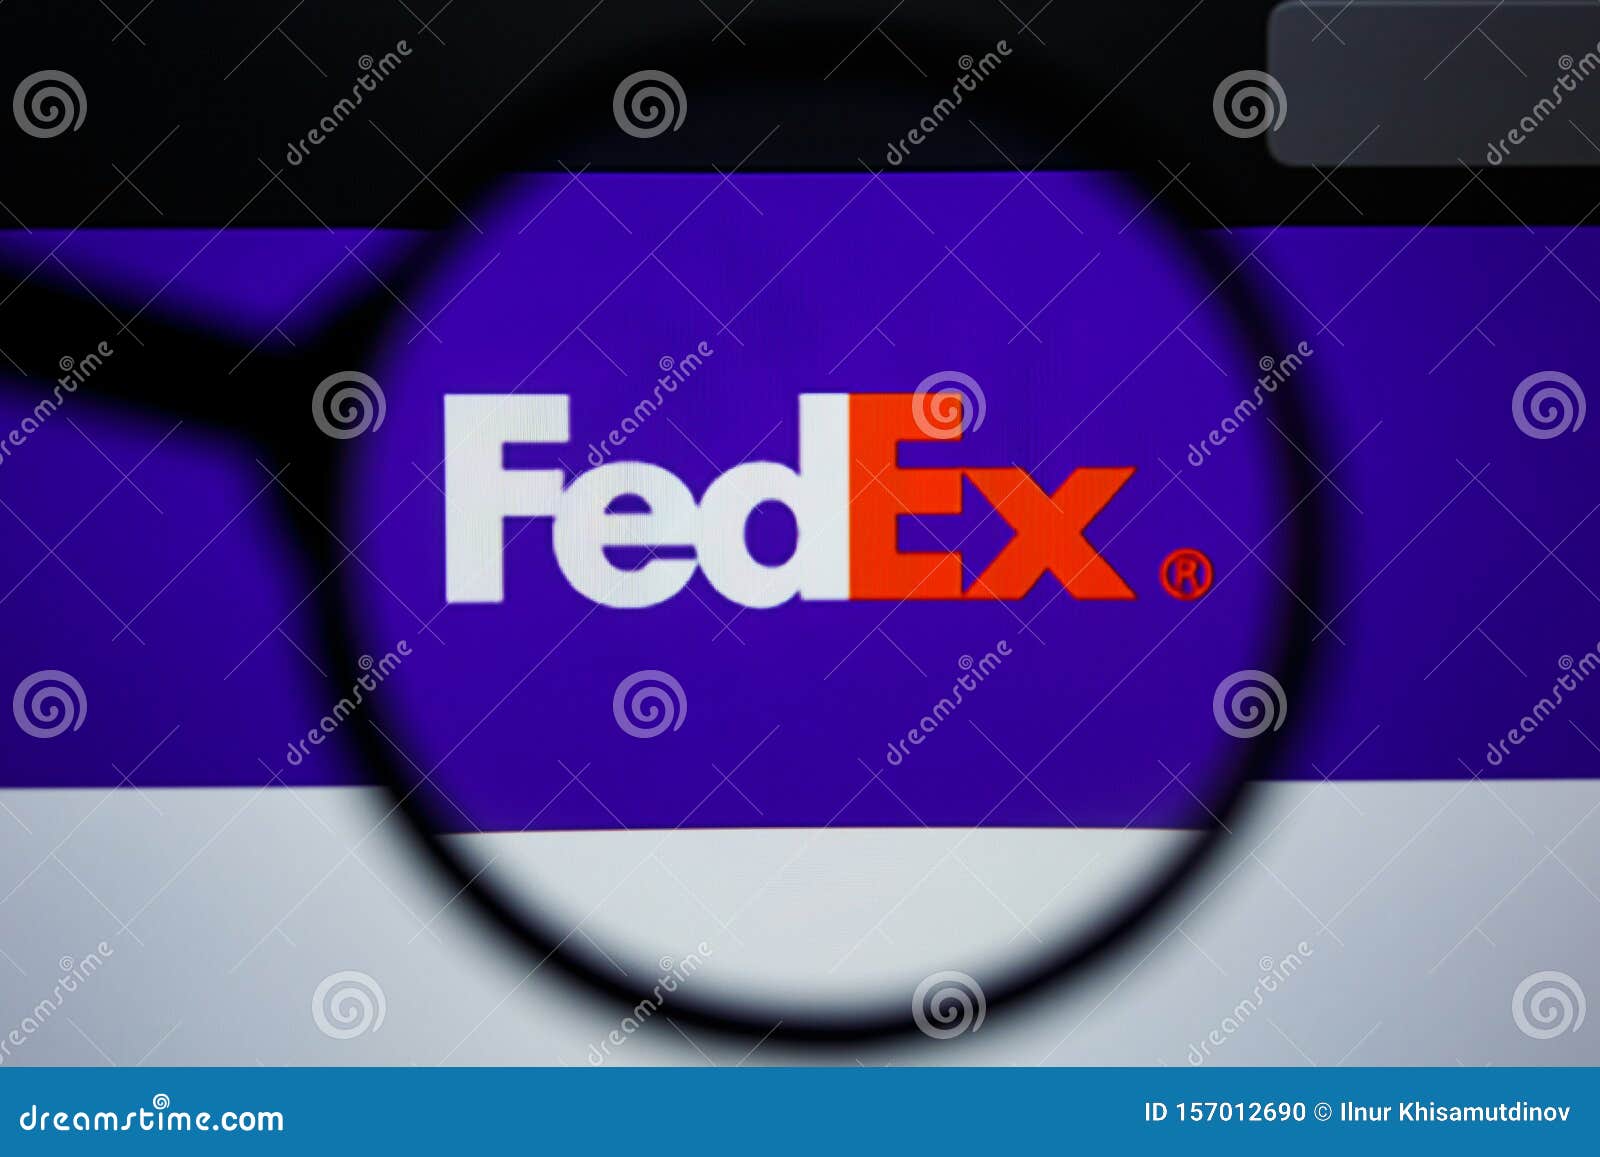 FedEx More Competitive Than Ever After Year of Opportunities Challenges   Business Wire